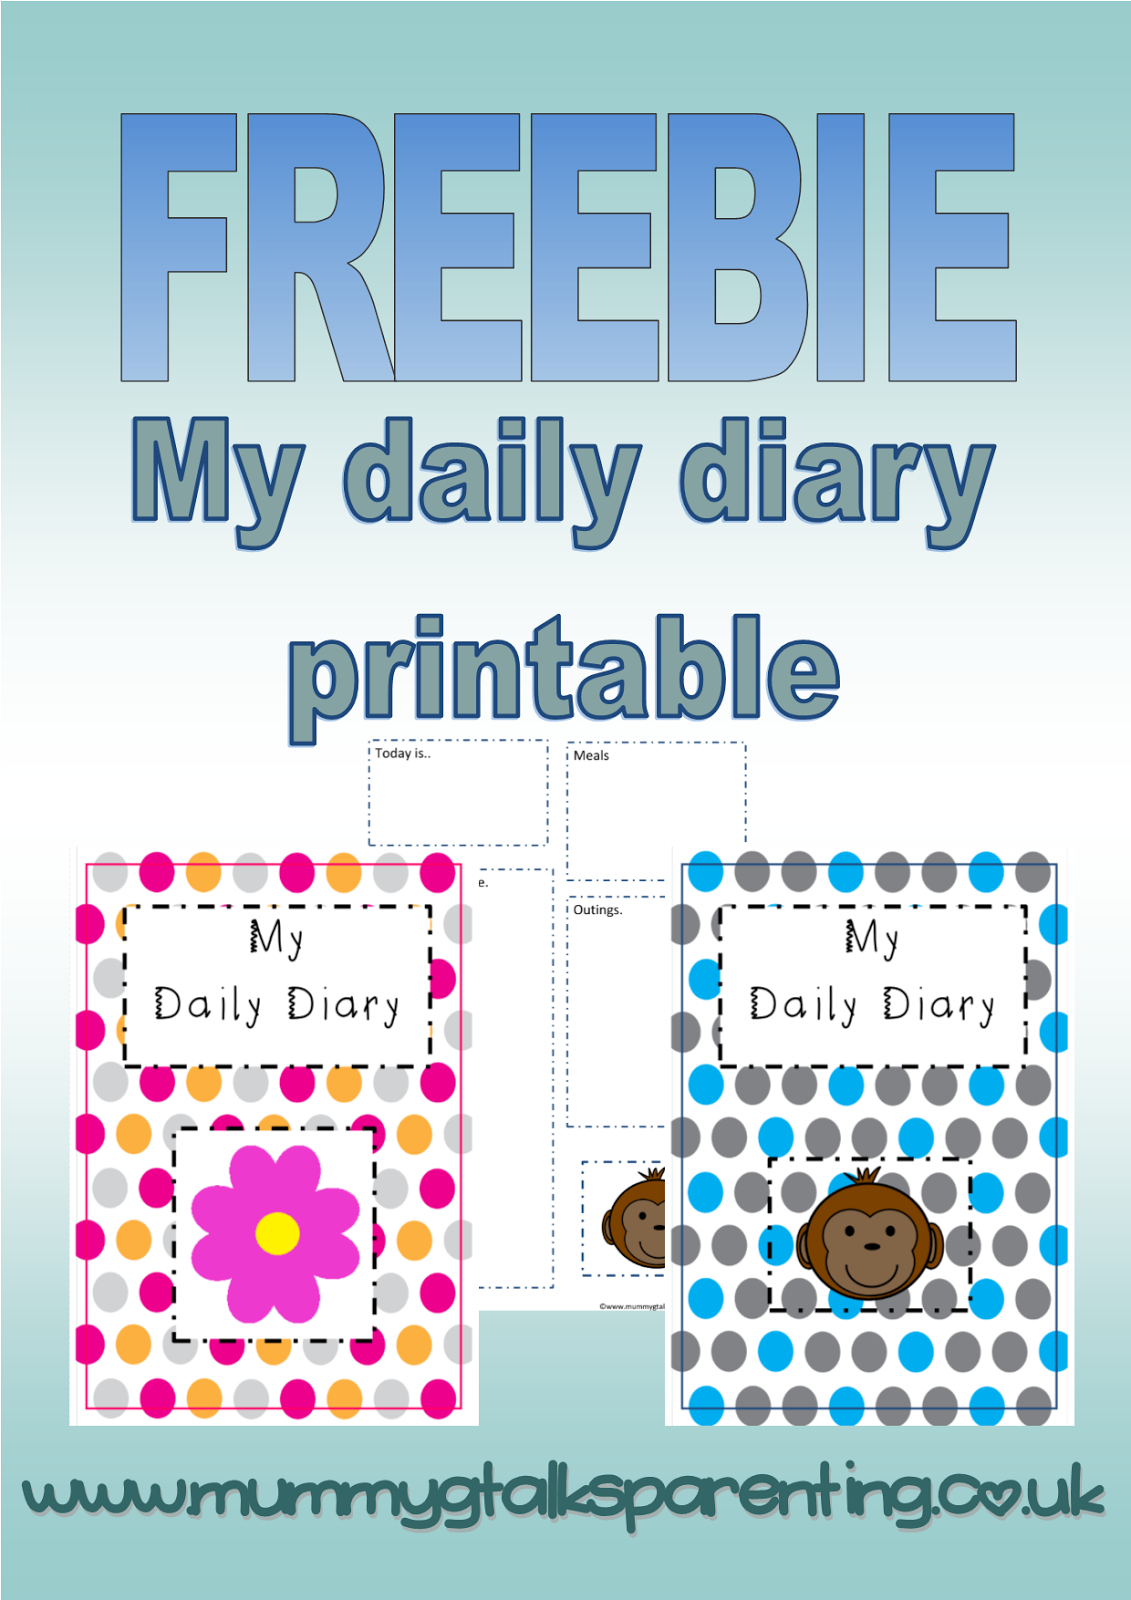 Freebie &amp;#039;my Daily Diary&amp;#039; Printable For Childminders And Nurseries - Free Printable Childminding Resources